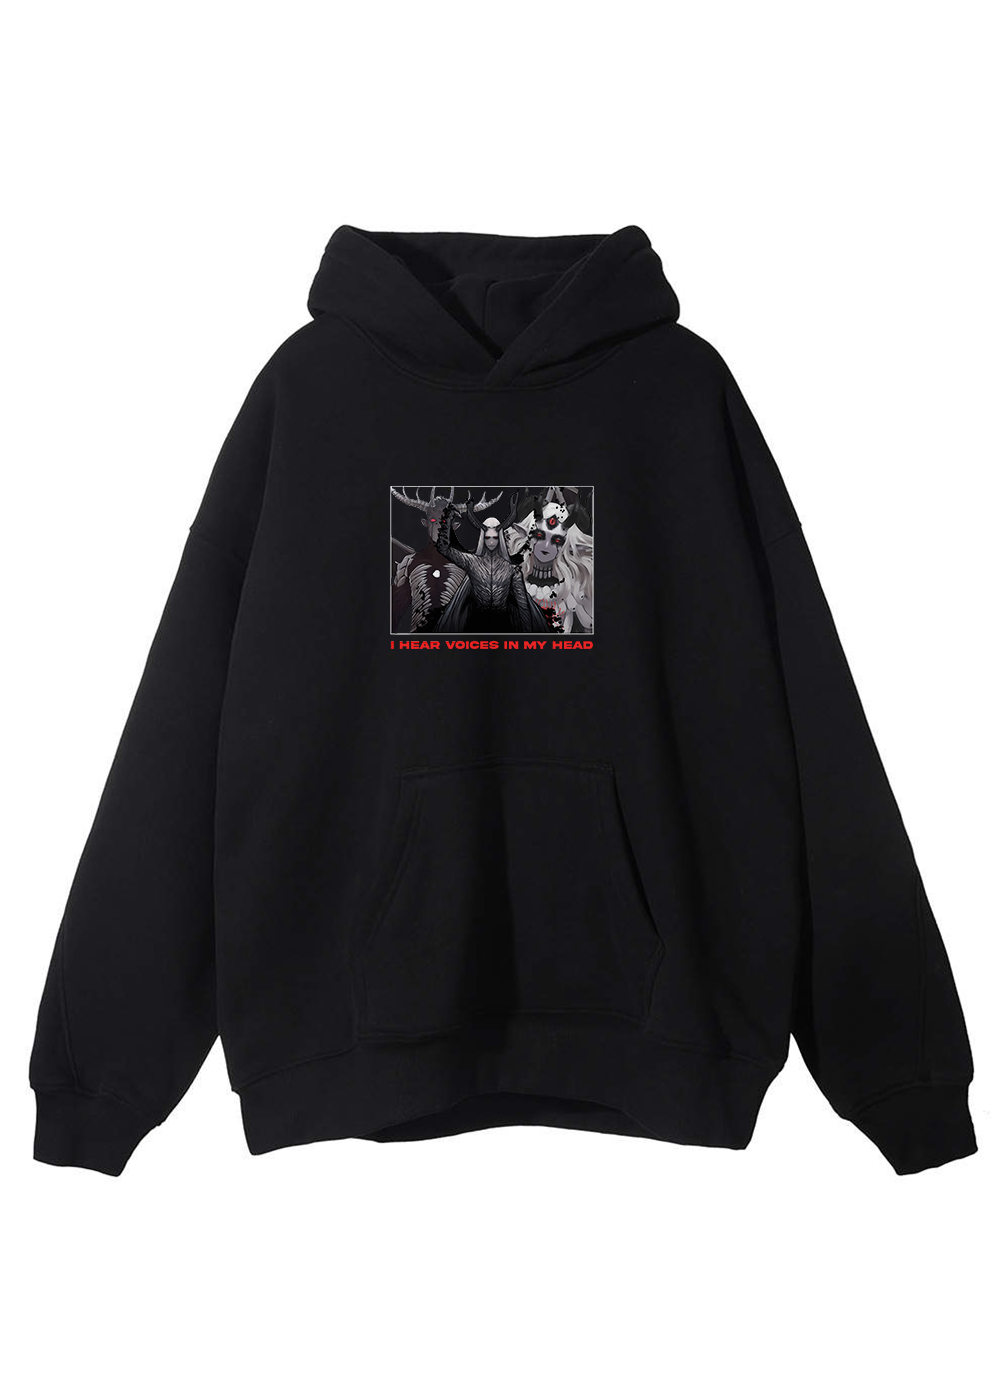 I HEAR VOICES IN MY HEAD HOODIE